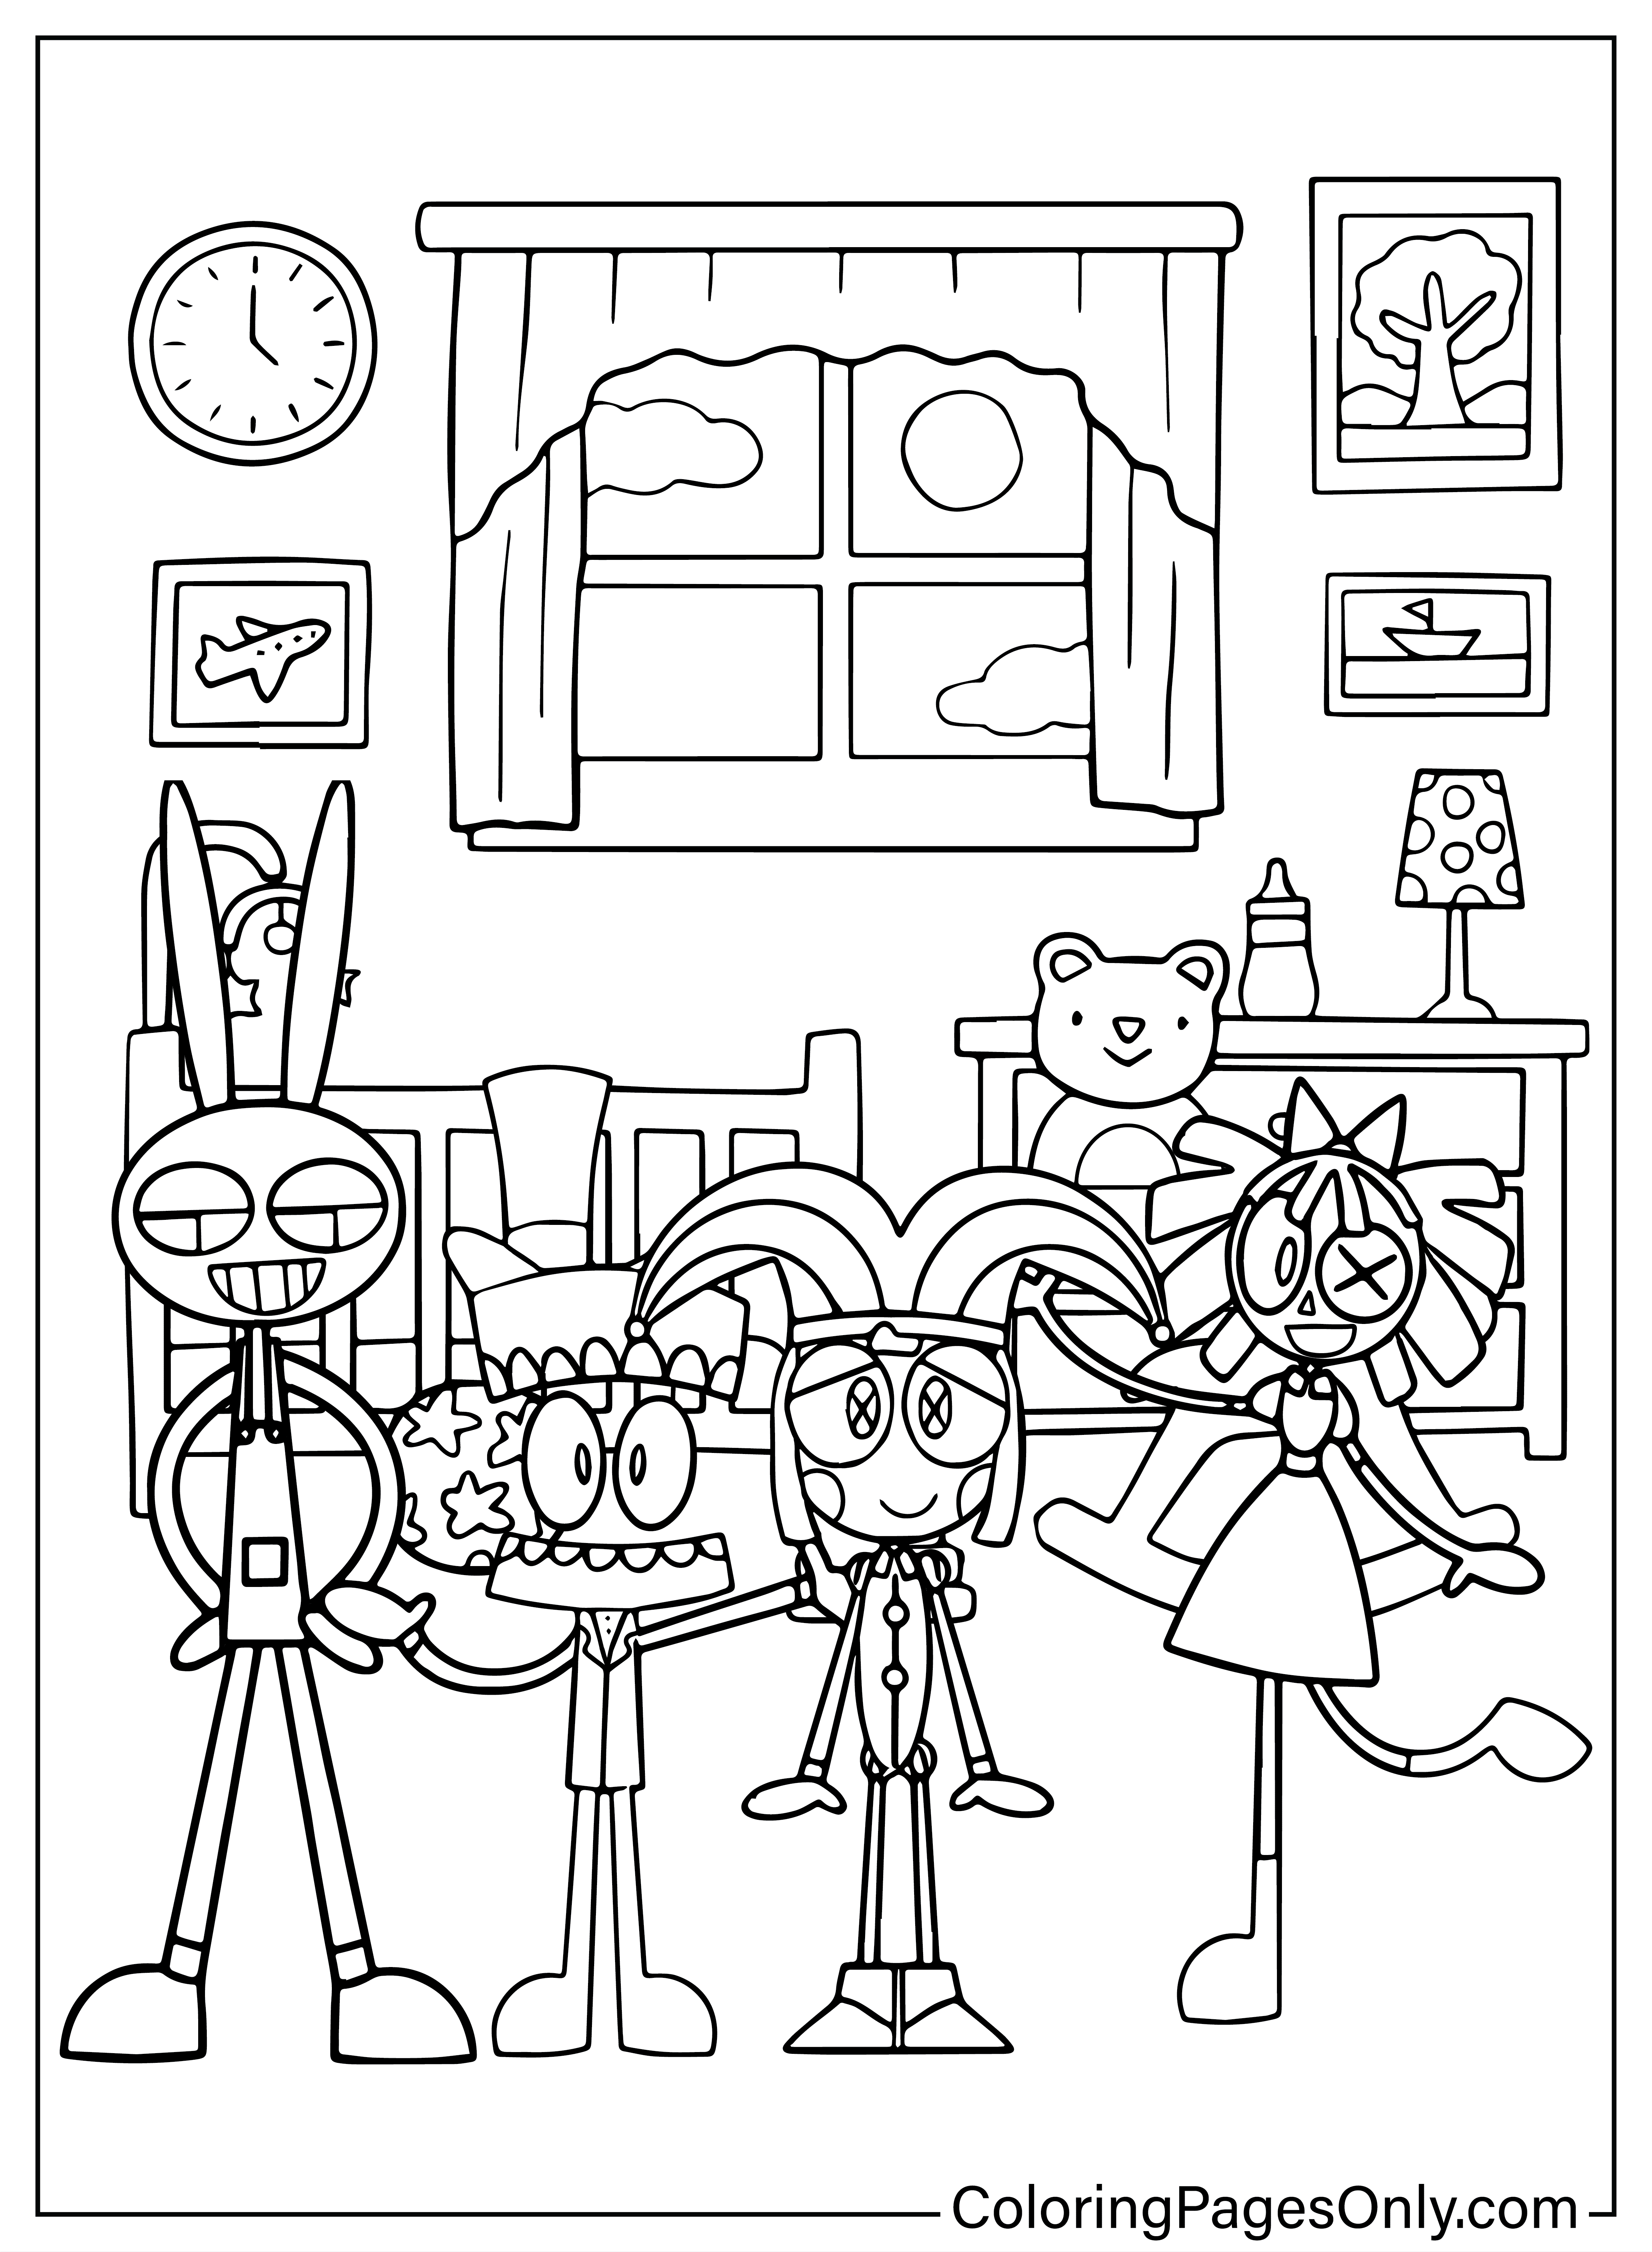 Pomni and Friends Coloring Page from Pomni